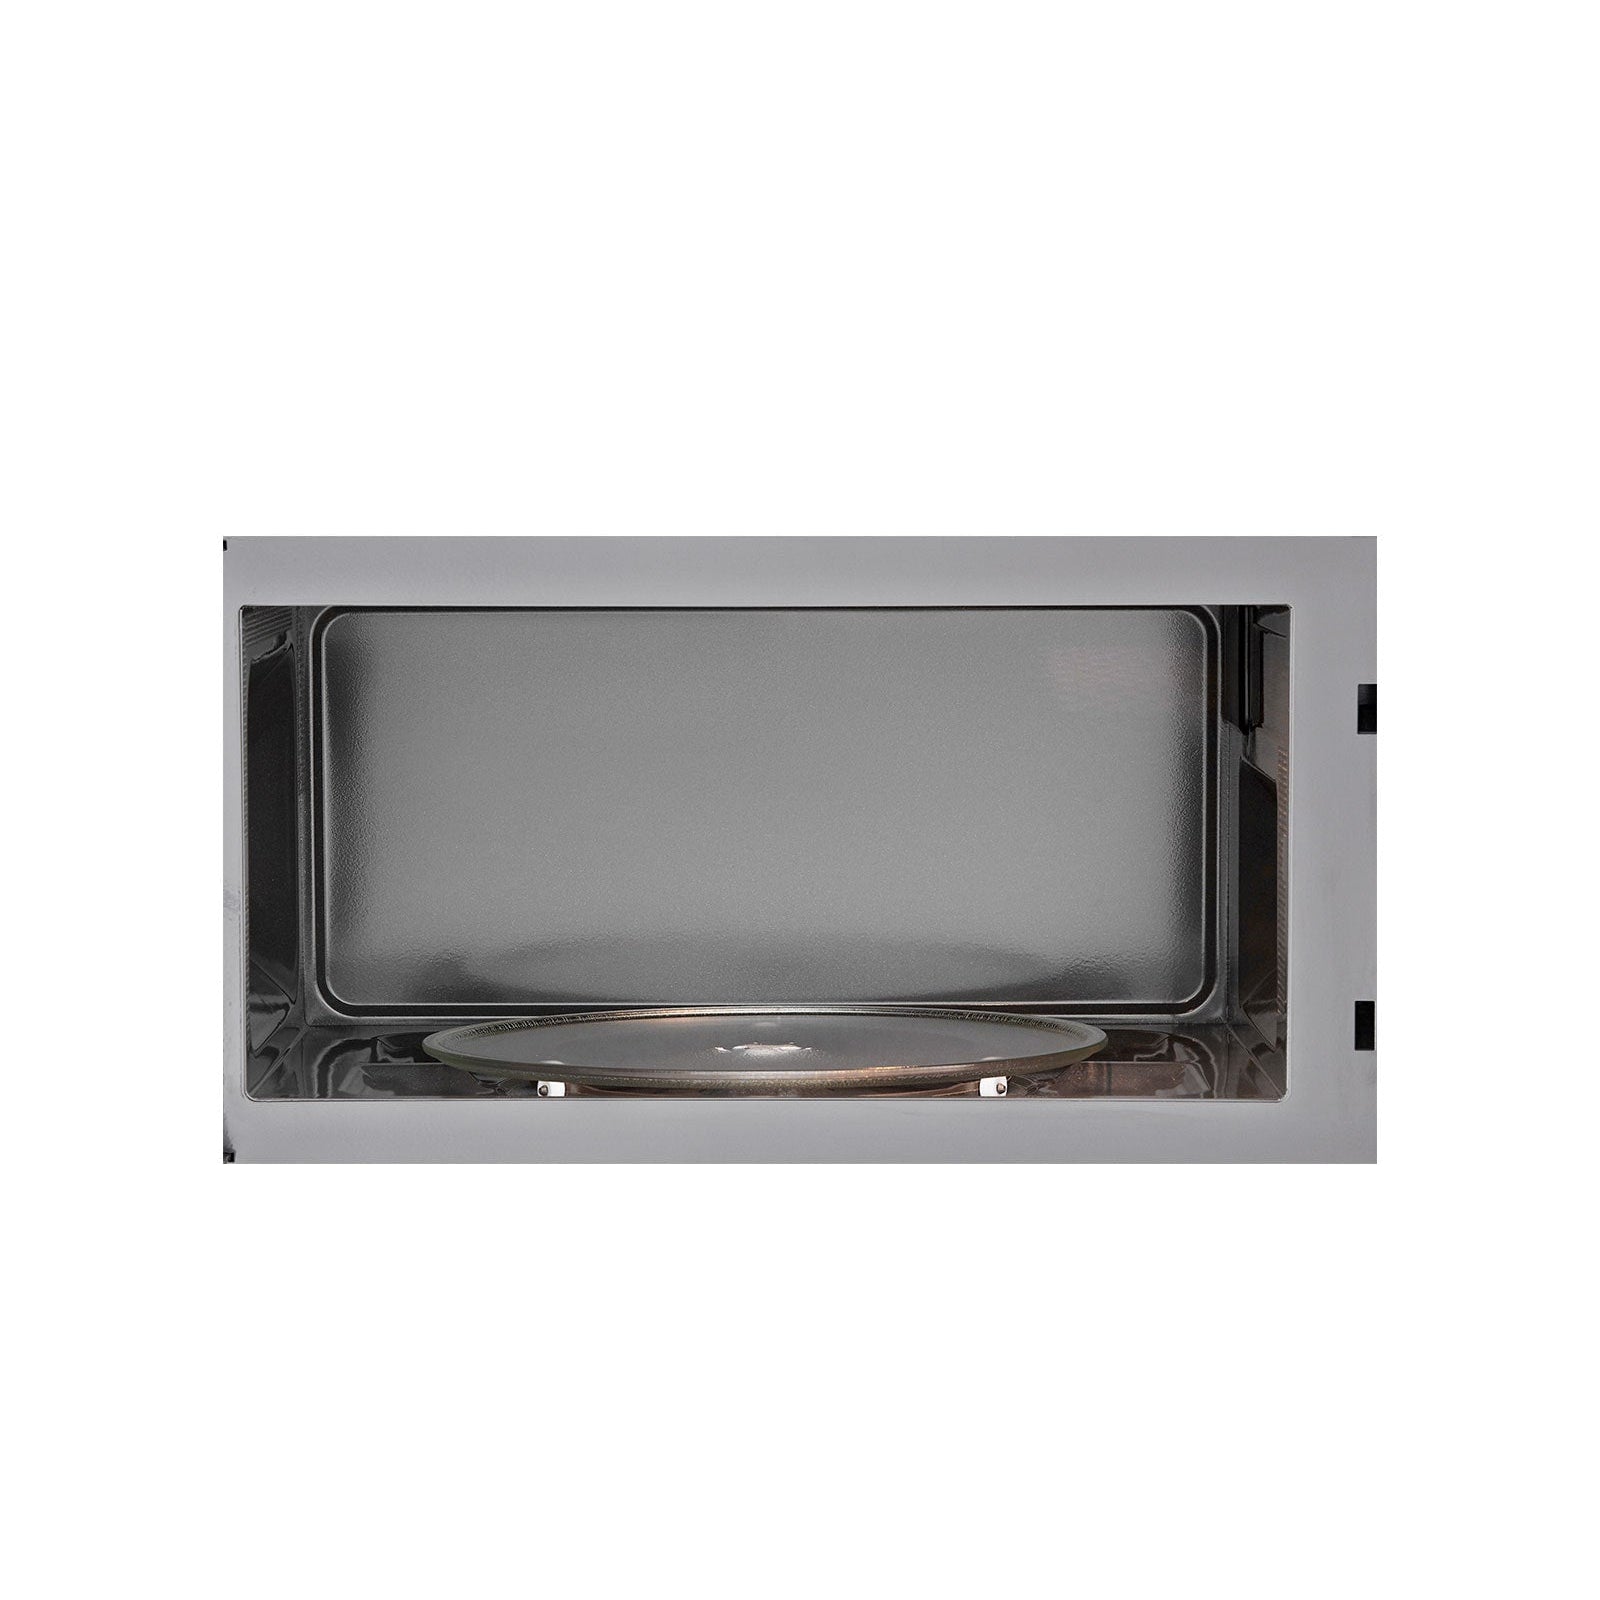 LG 1.7 Cu Ft Over the Range Microwave- Stainless